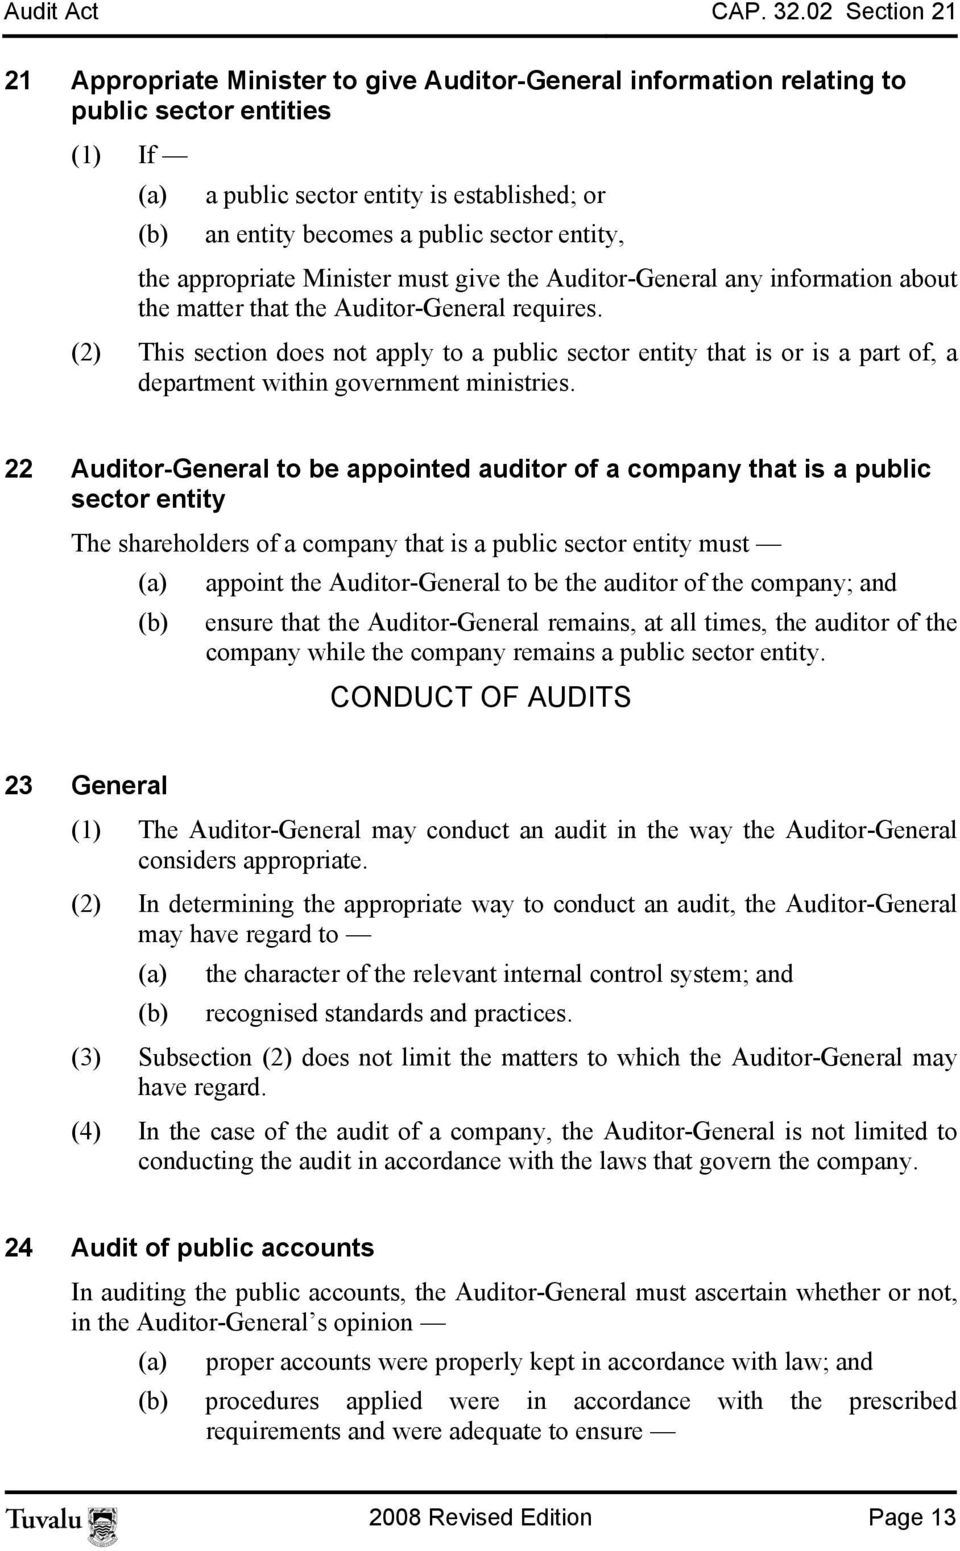 entity, the appropriate Minister must give the Auditor-General any information about the matter that the Auditor-General requires.